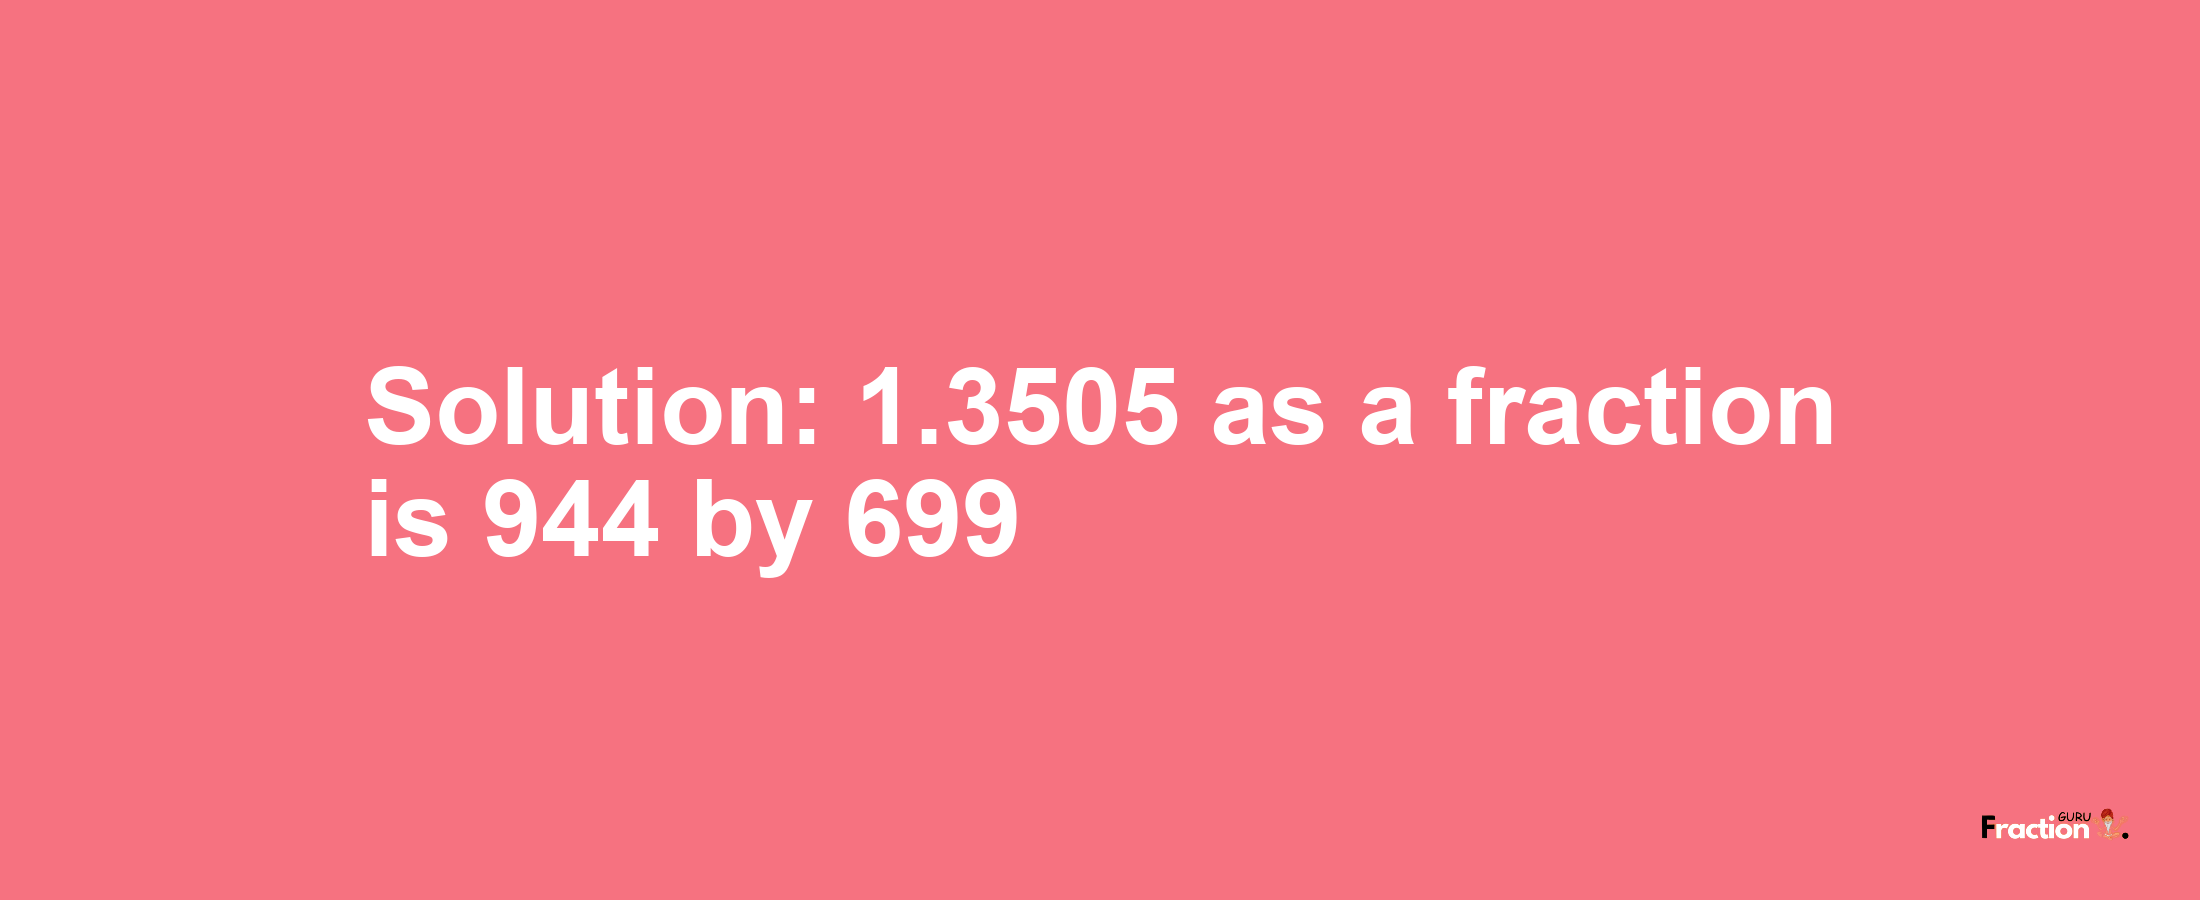 Solution:1.3505 as a fraction is 944/699